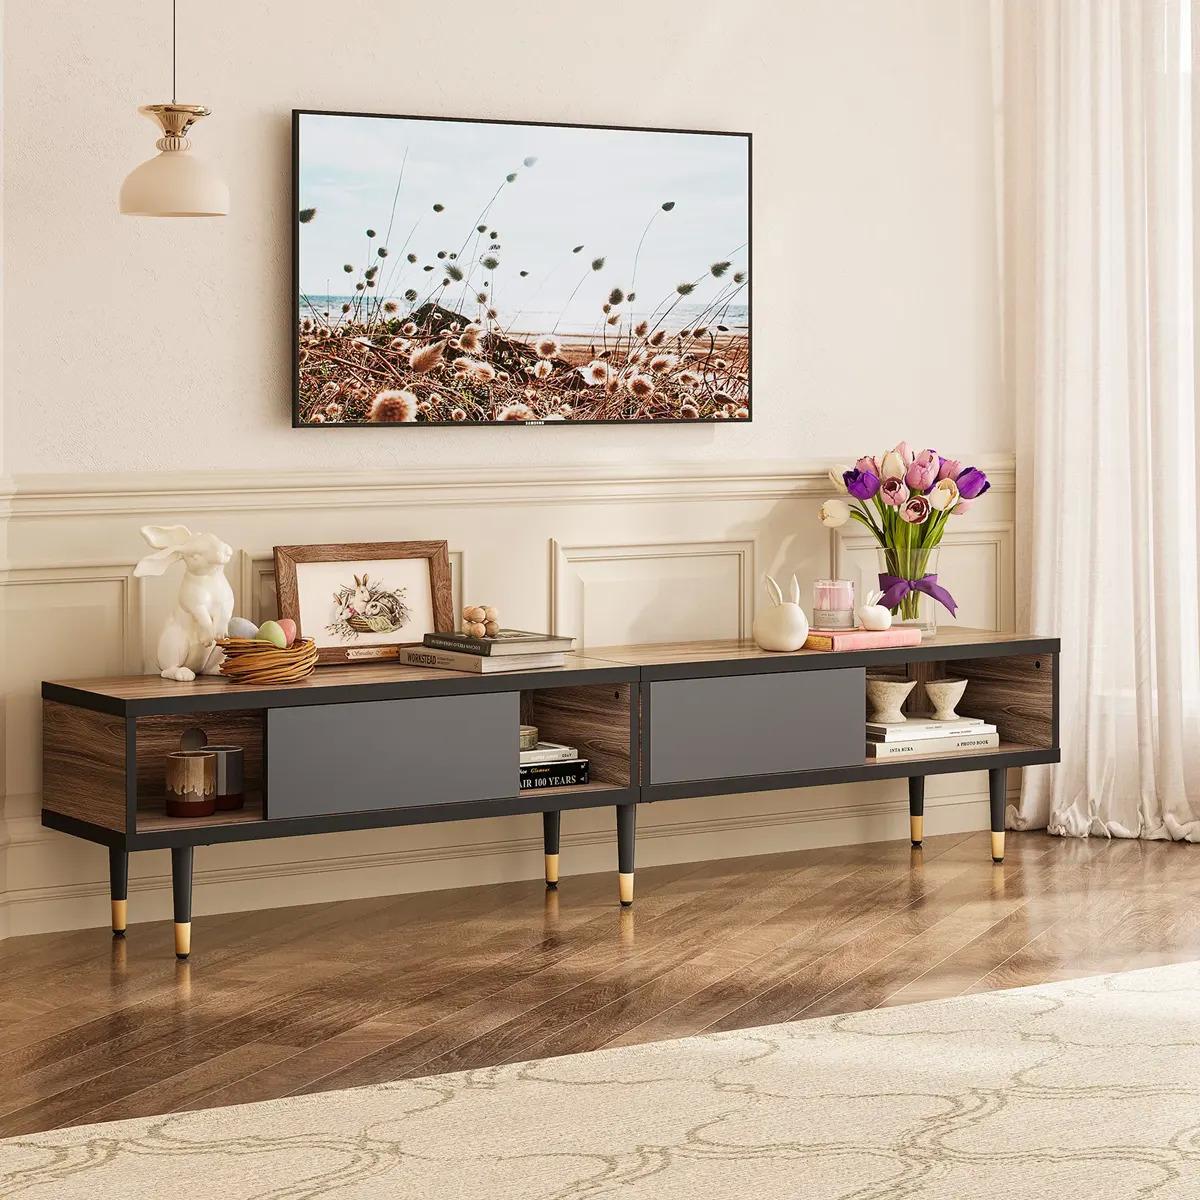 Bestier TV Stand Mid-Century Modern with Sliding Doors for $128 Shipped